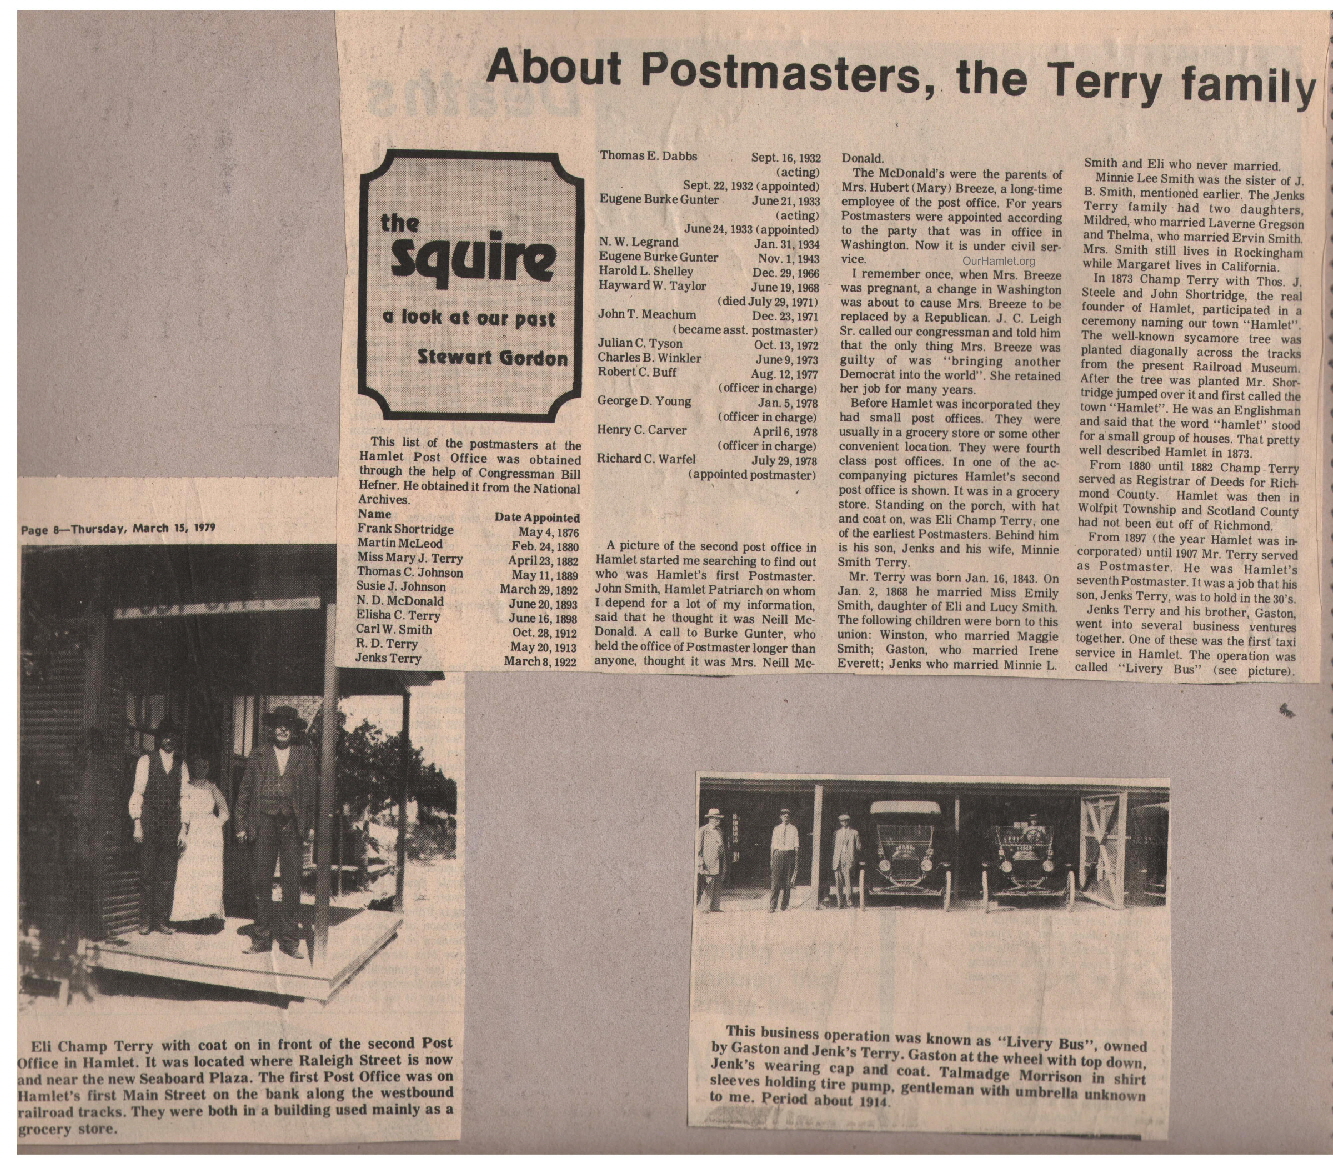 The Squire - About Postmasters a OH